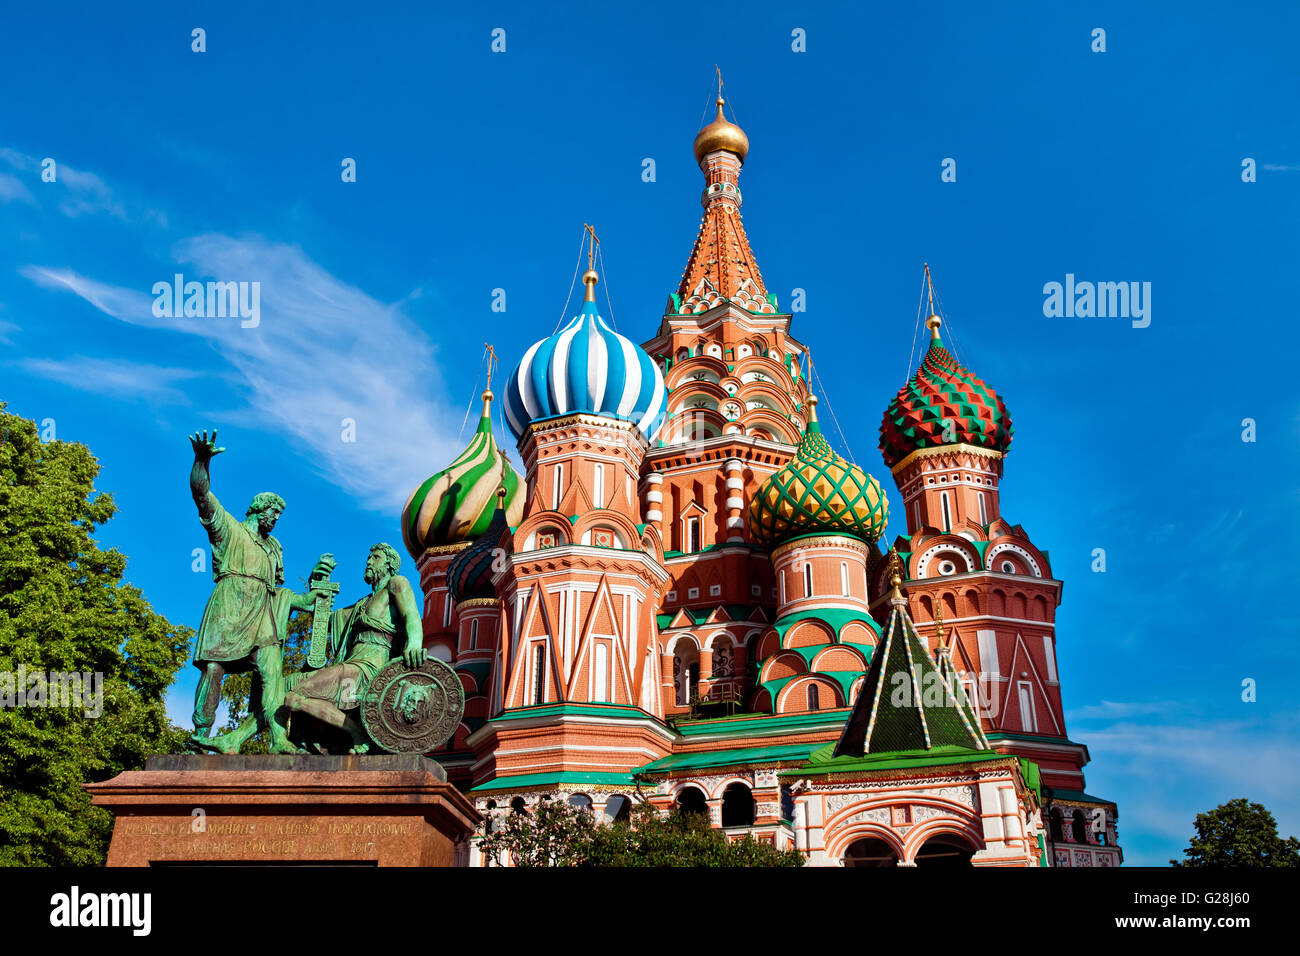 St. Basil's Cathedral on Red square in Moscow. Monument of Minin and Pozharsky in Moscow, Russia. Main attractions of Moscow cit Stock Photo